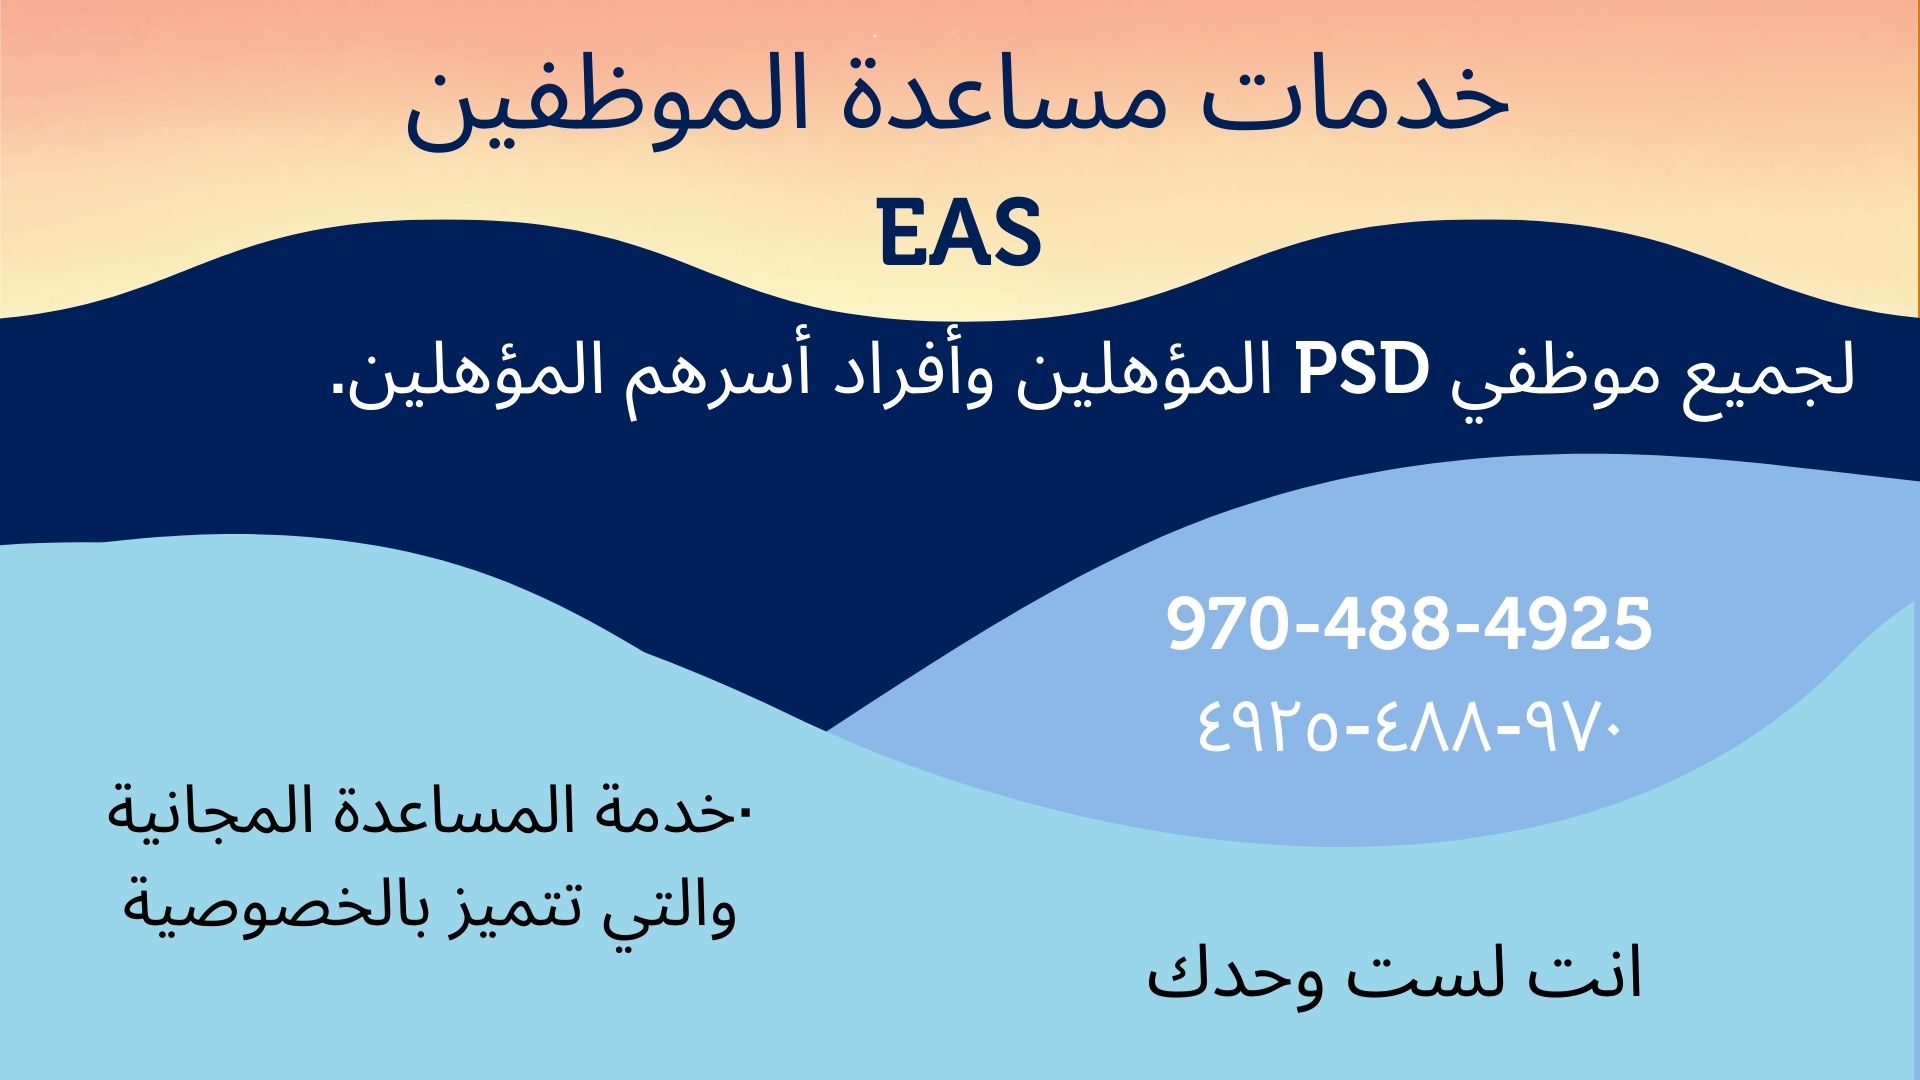 Arabic EAS slide - information is in the linked document.